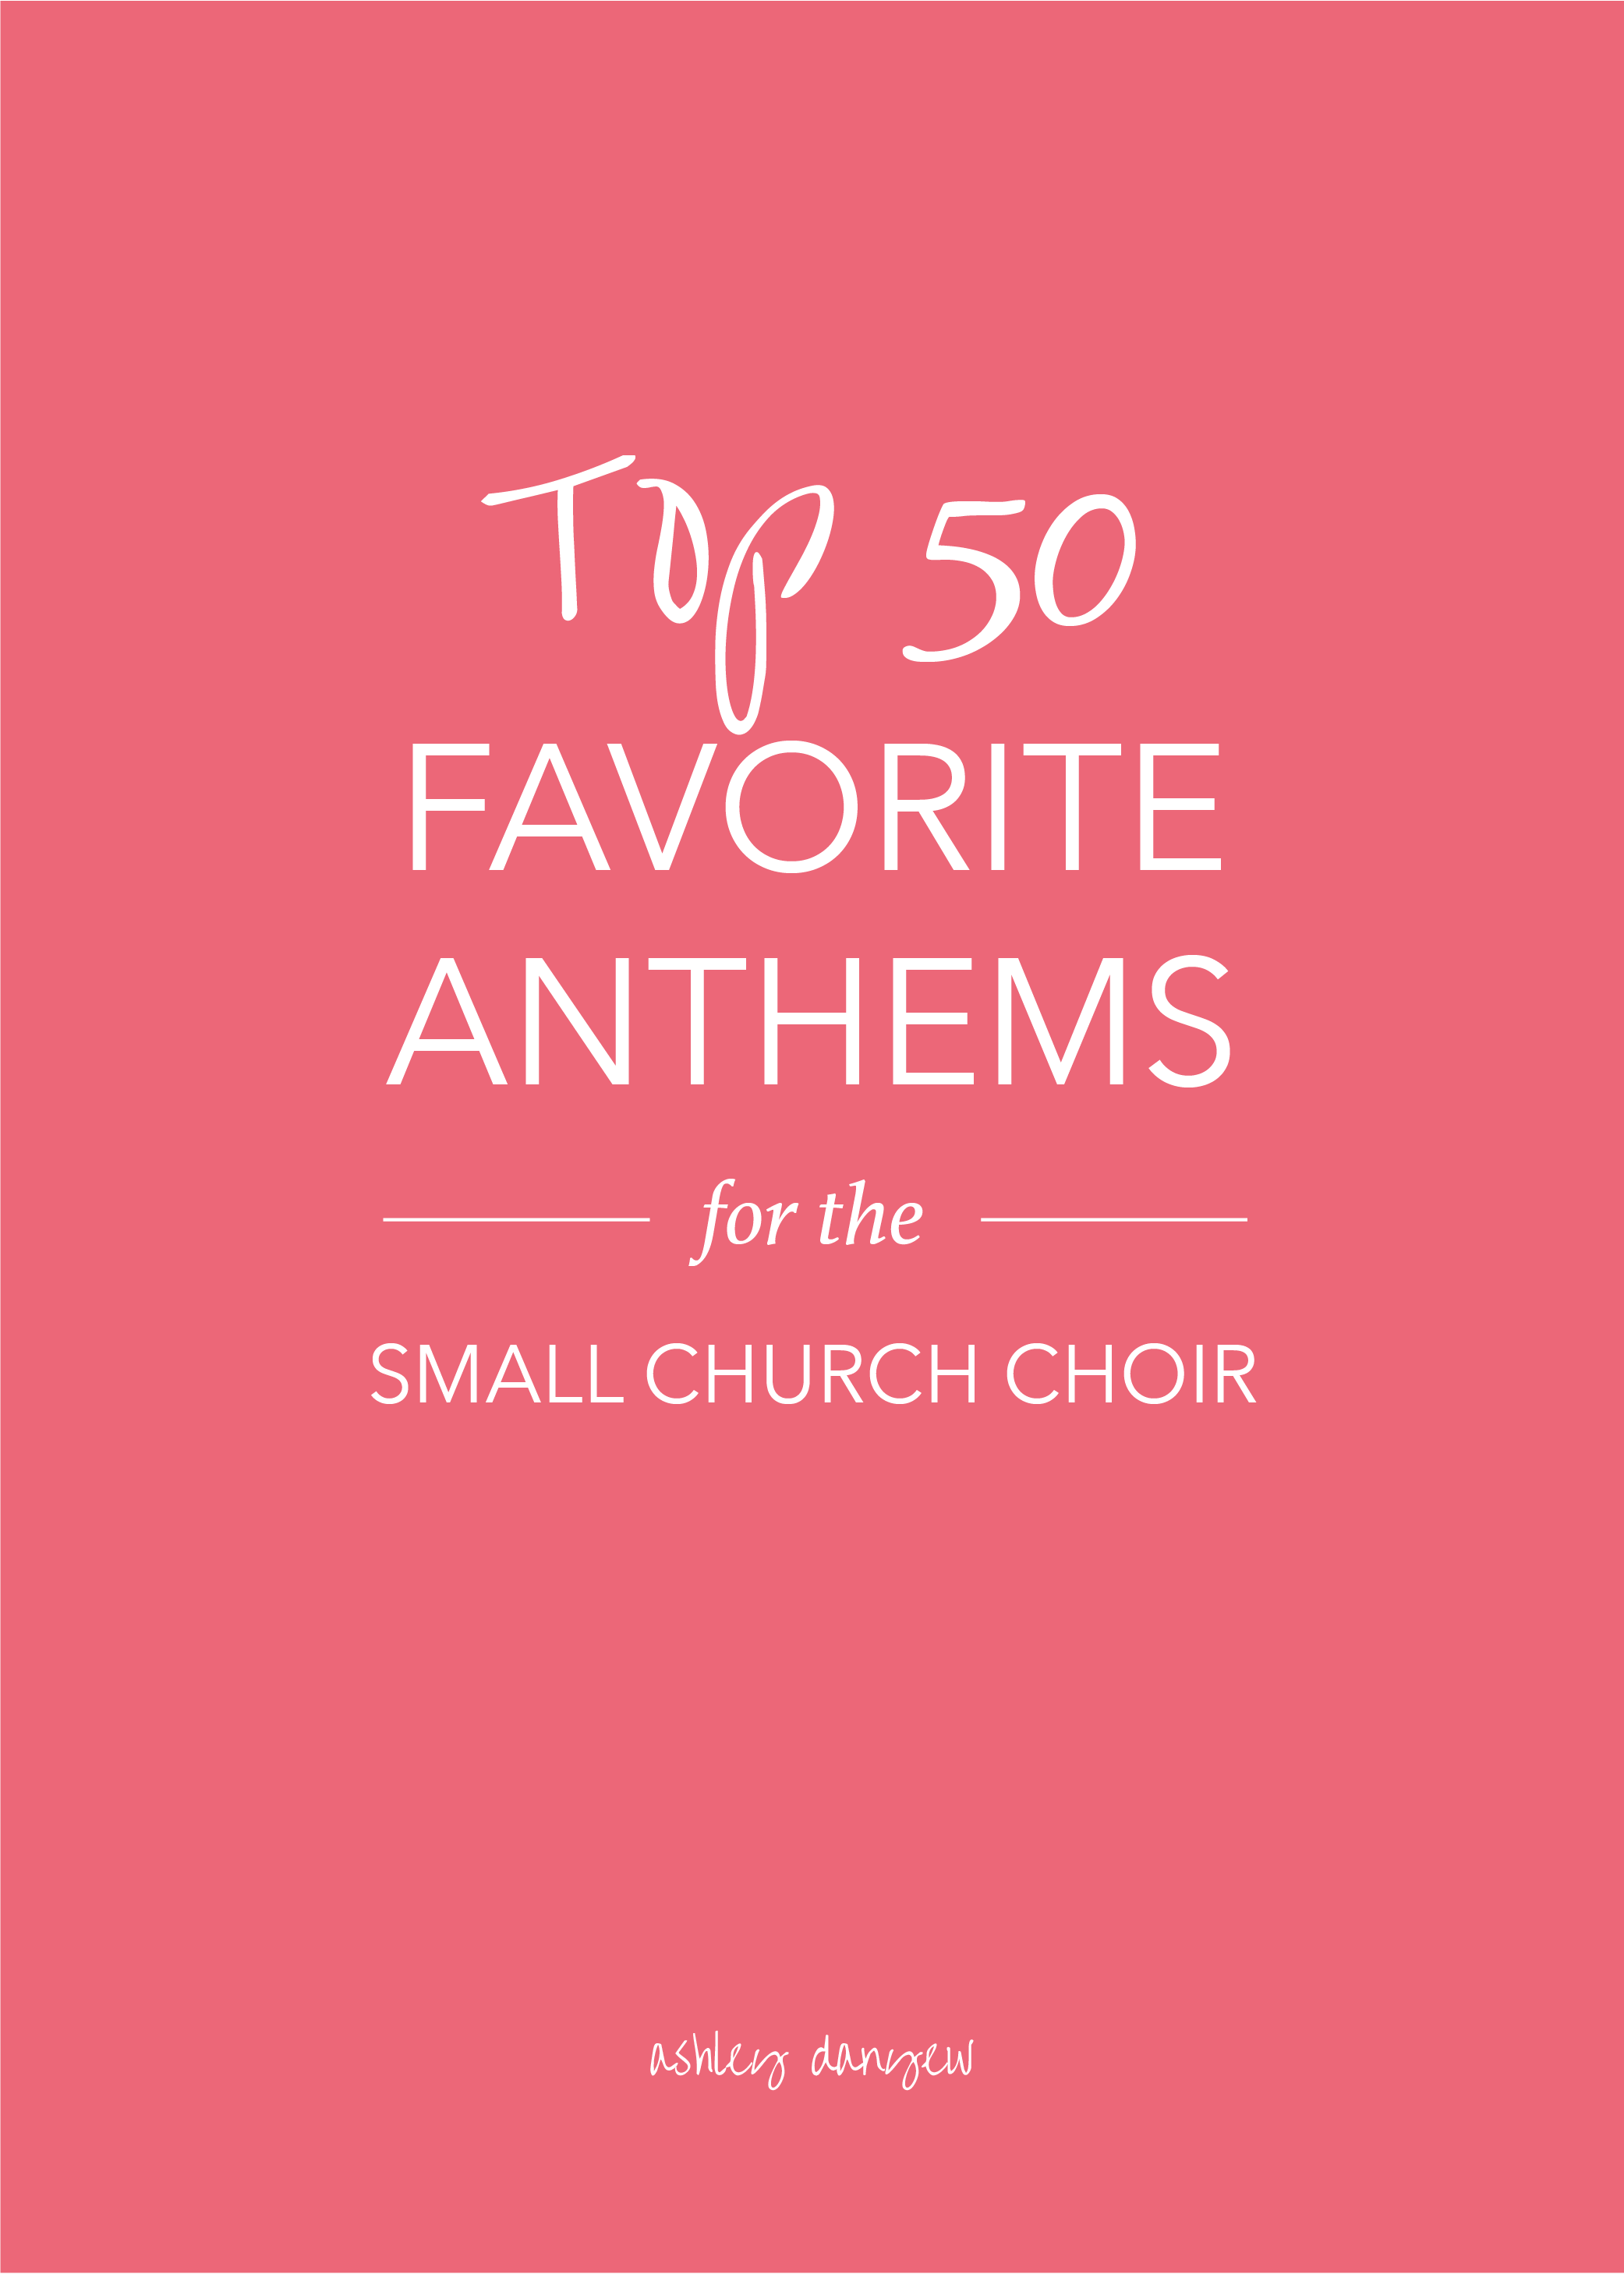 50 Favorite Anthems for the Small Church Choir-01.png